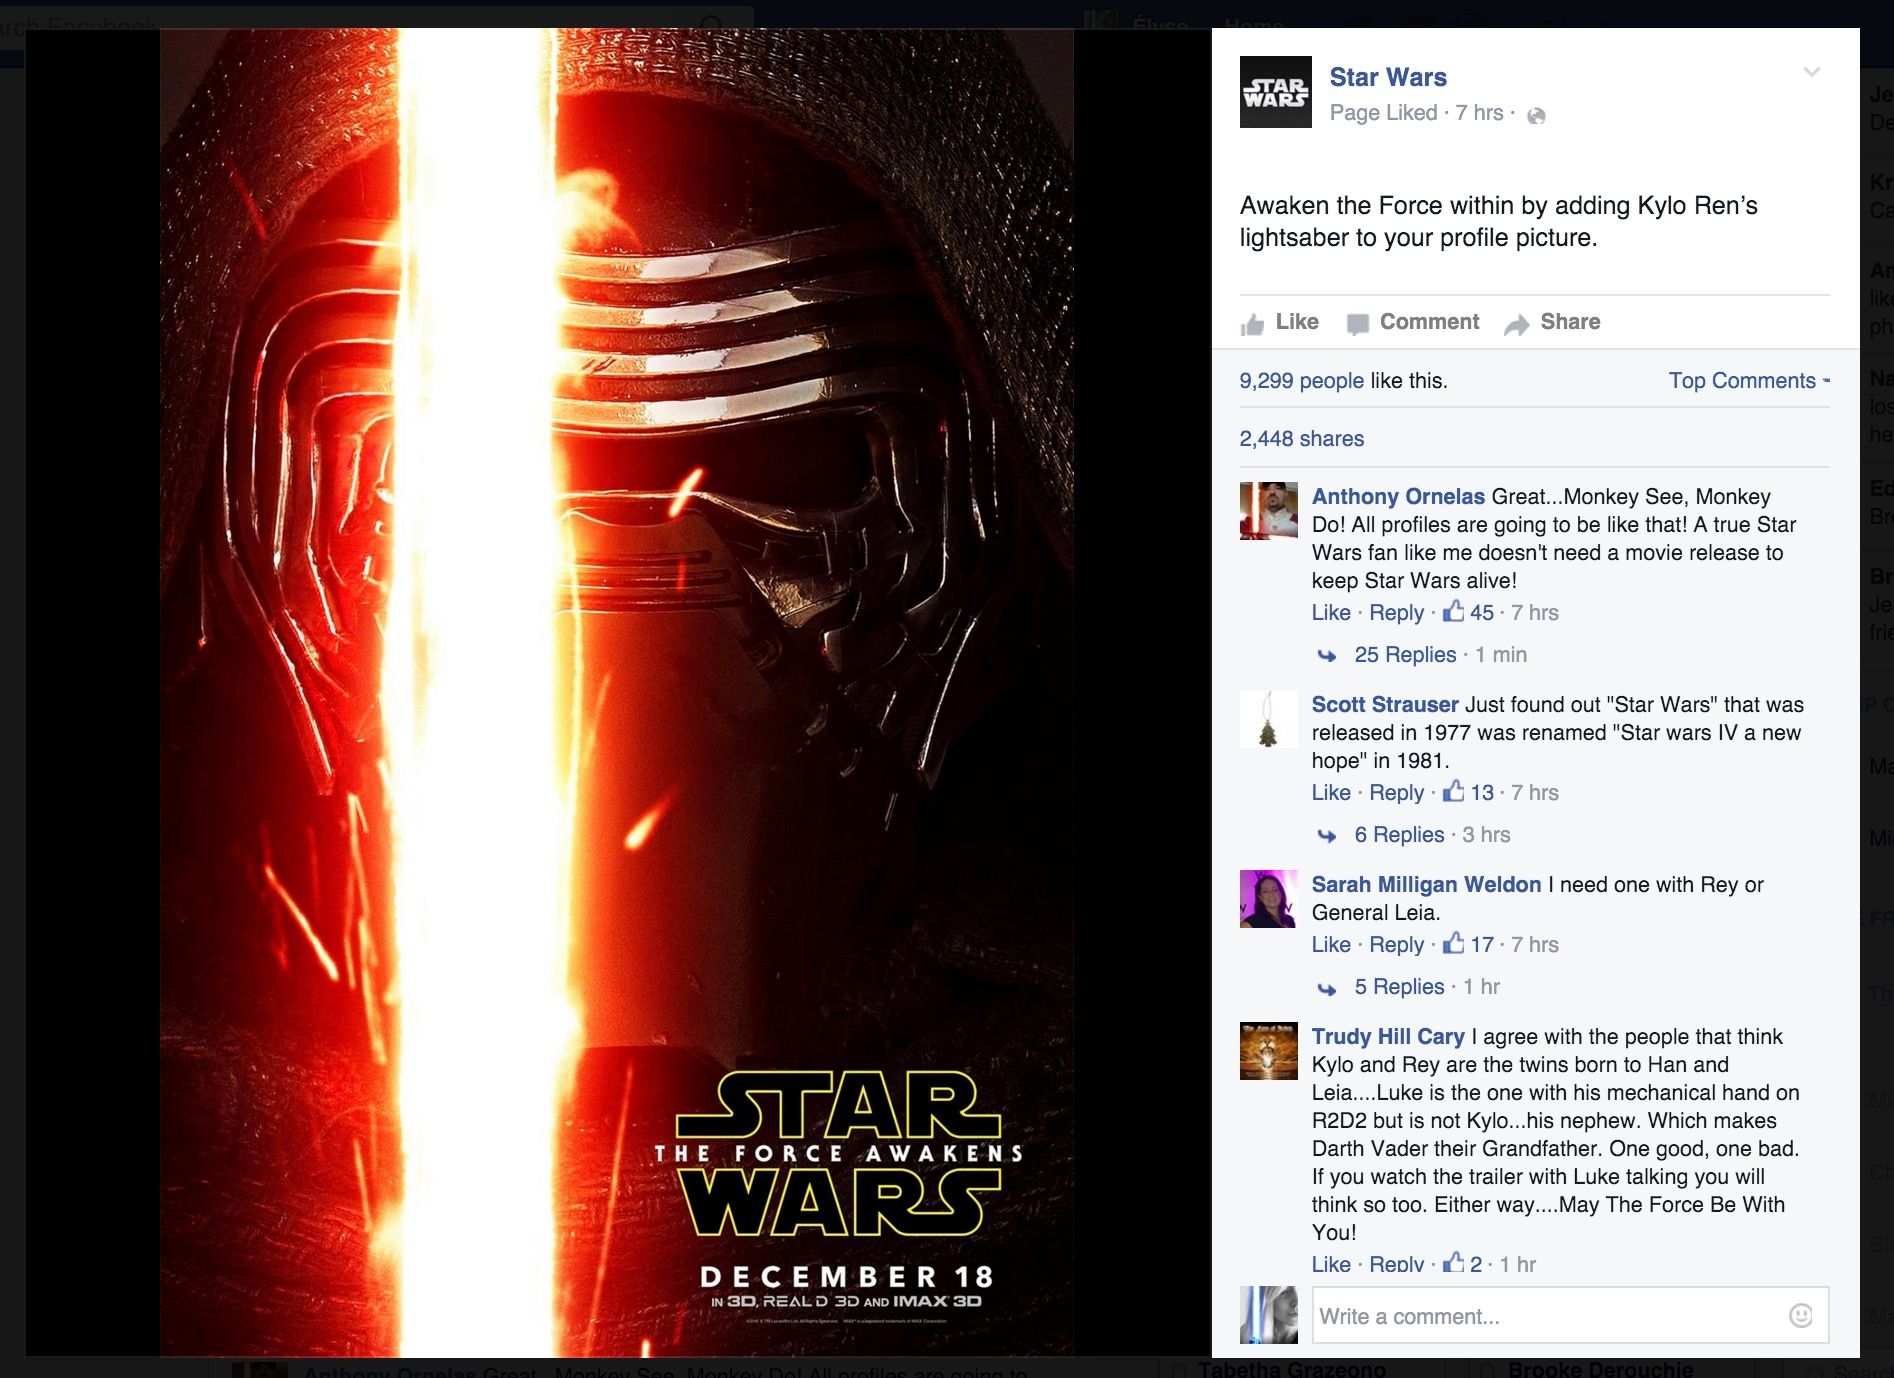 get ready for the lightsaber to invade your facebook stream image 1